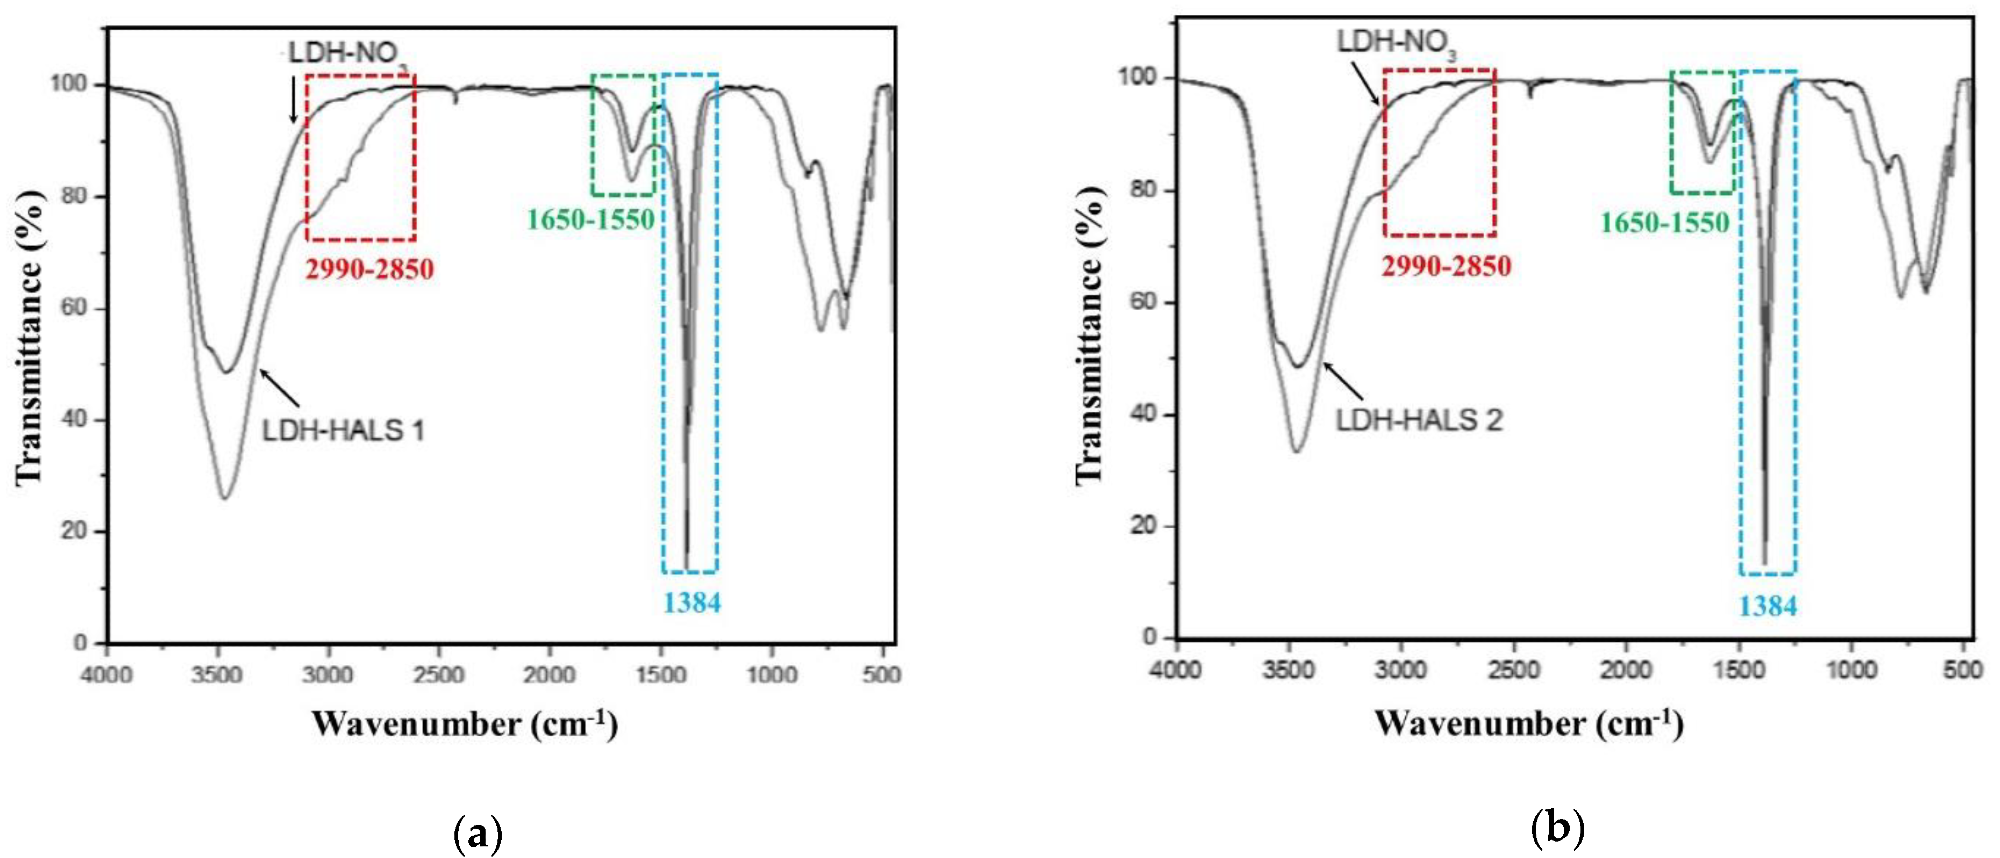 FTIR spectra of (a) LDH-HALS1 and (b) LDH-HALS2 in comparison to the spectrum of LDH-NO3..